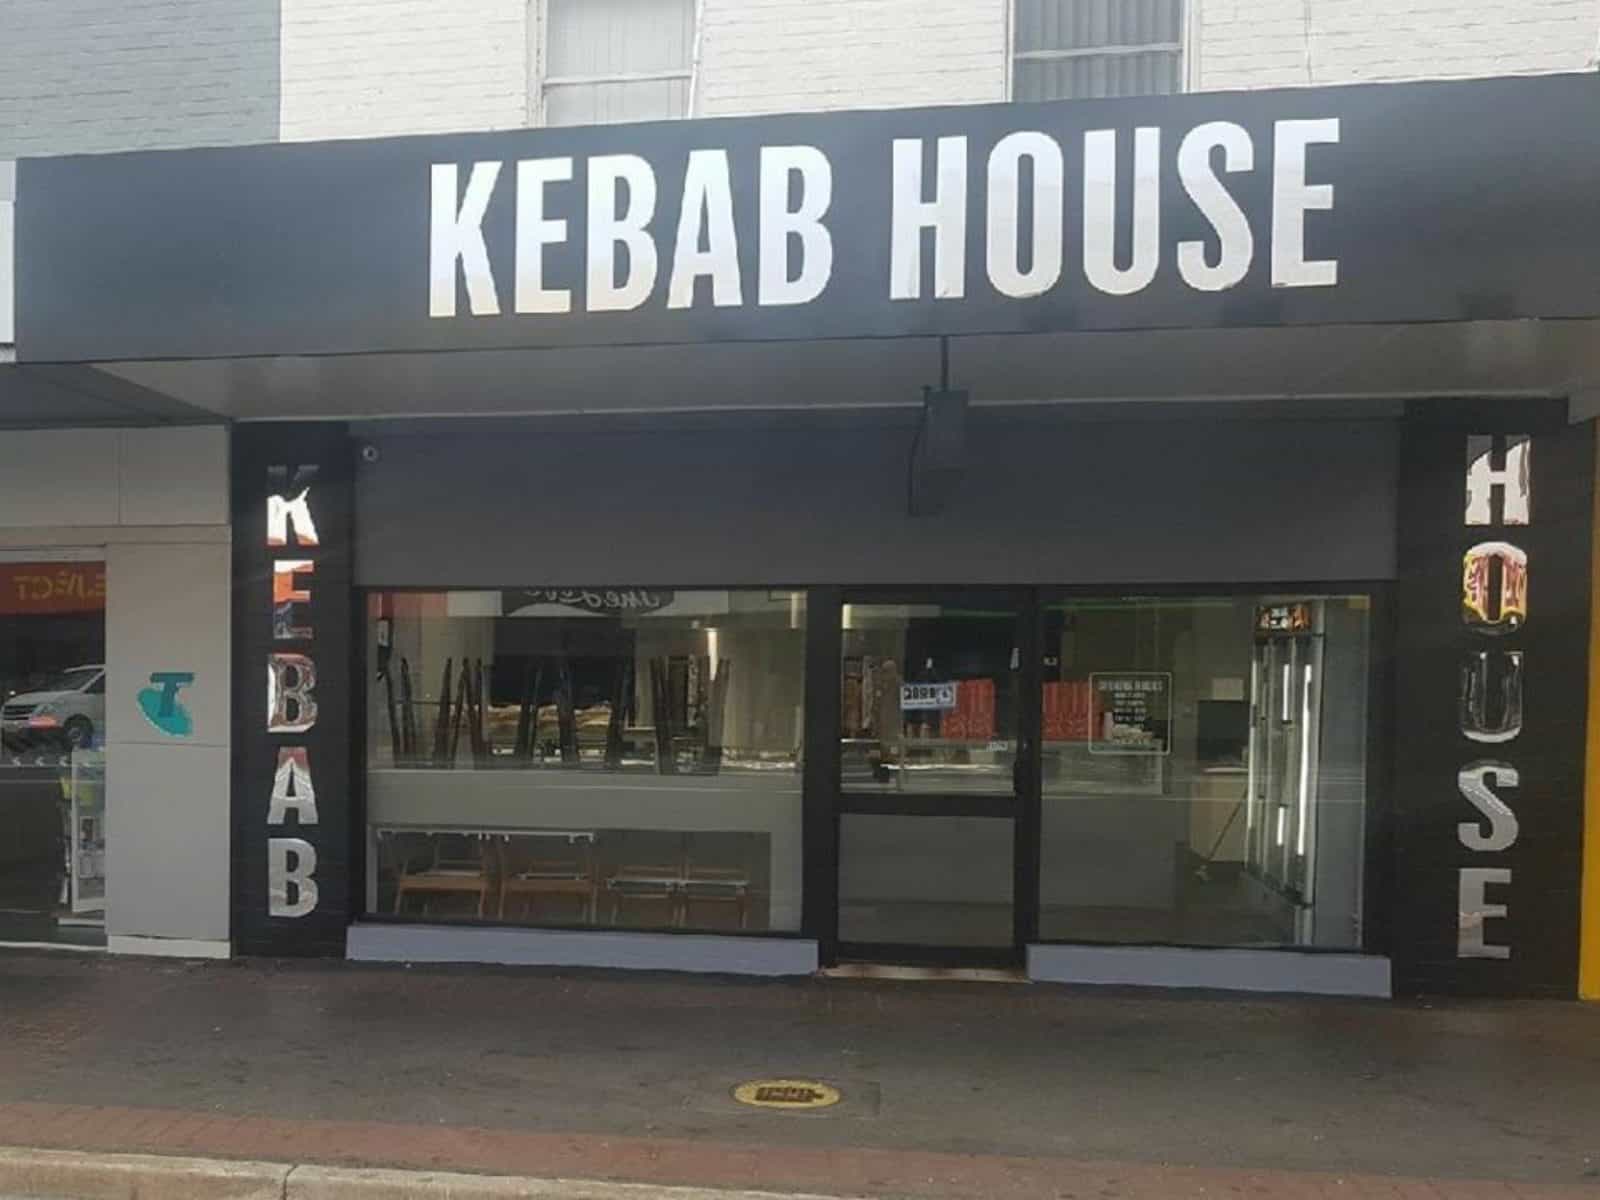 The Kebab House Restaurant Young Hilltops Region NSW 2594